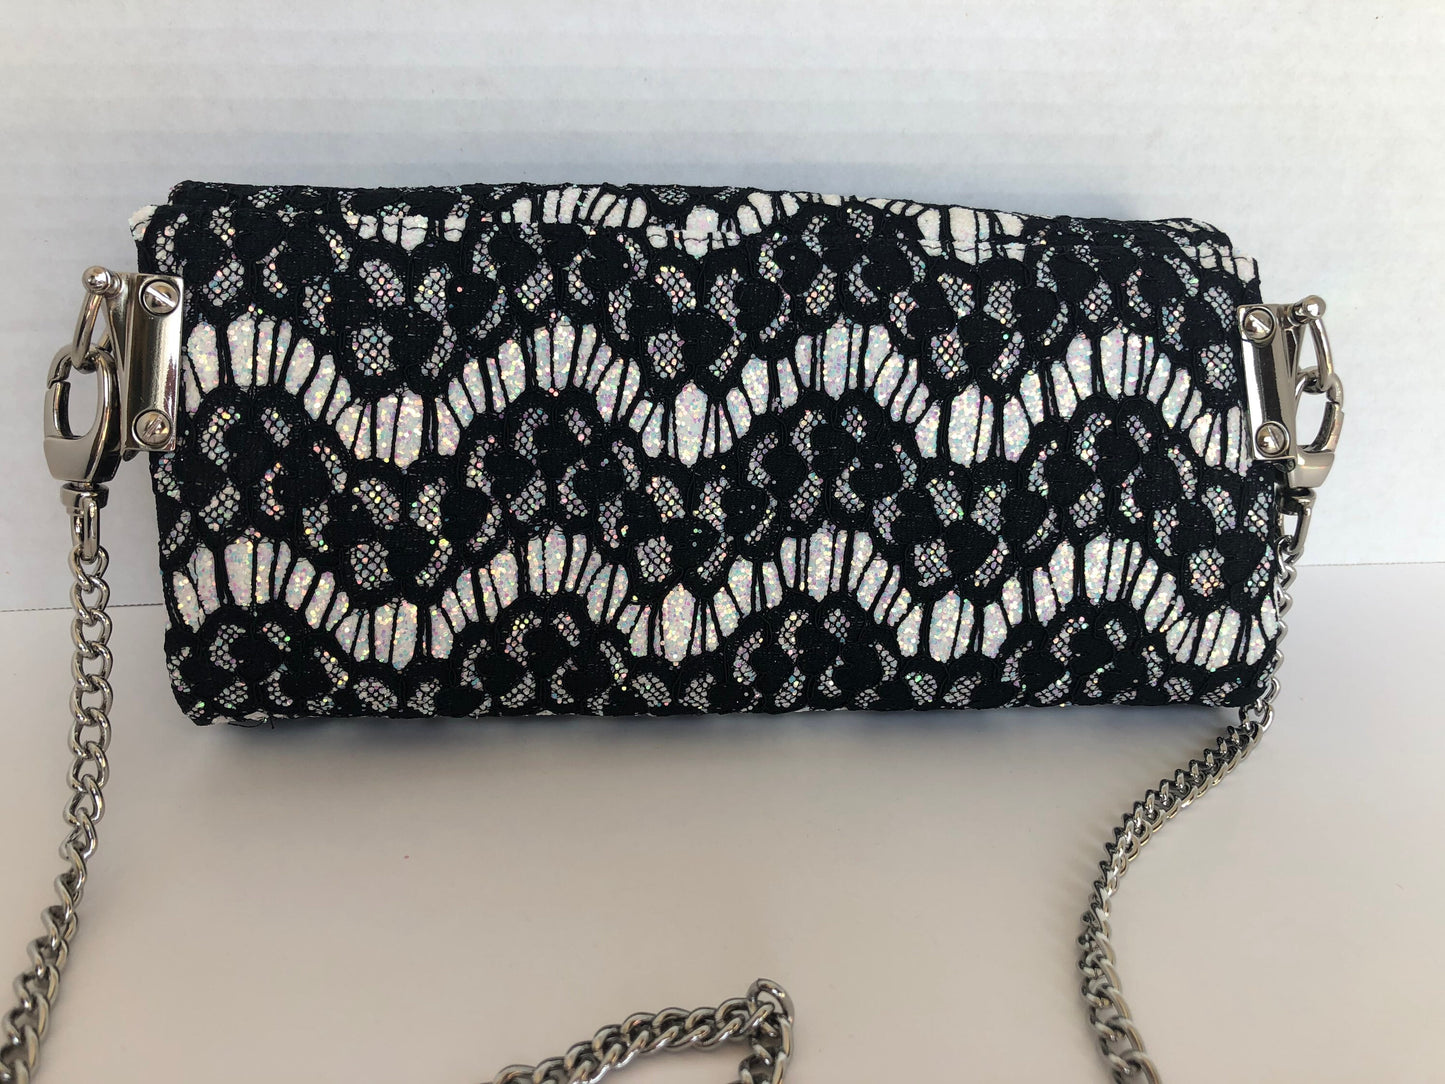 Black Lace over White Glitter Canvas Evening Bag, Wallet with Bag Chain, Ladies Wallet, Clutch bag